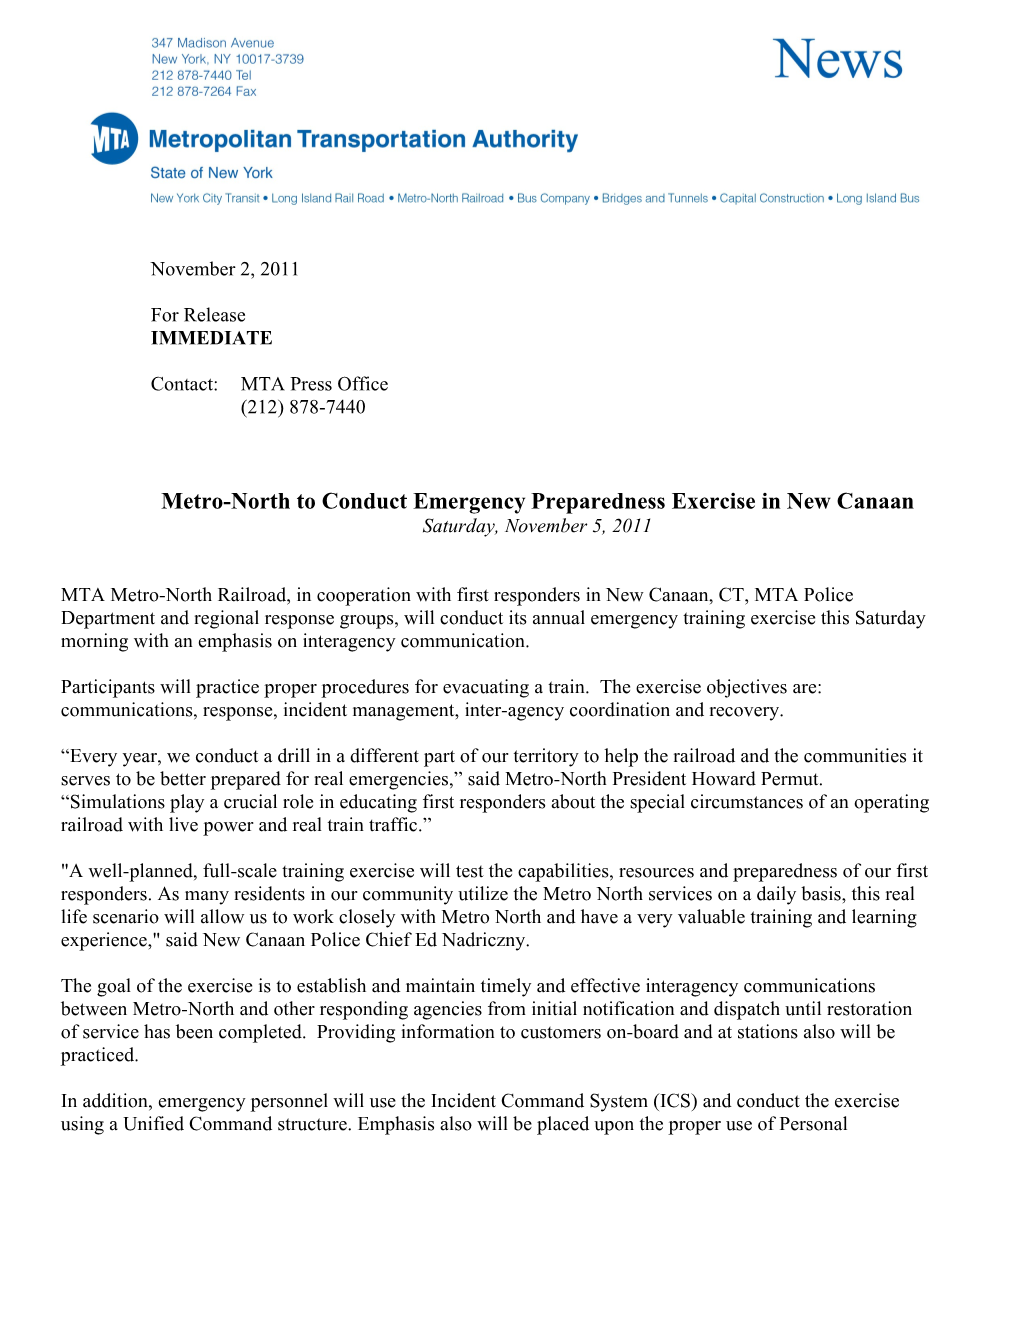 Metro-North to Conduct Emergency Preparedness Exercise in New Canaan